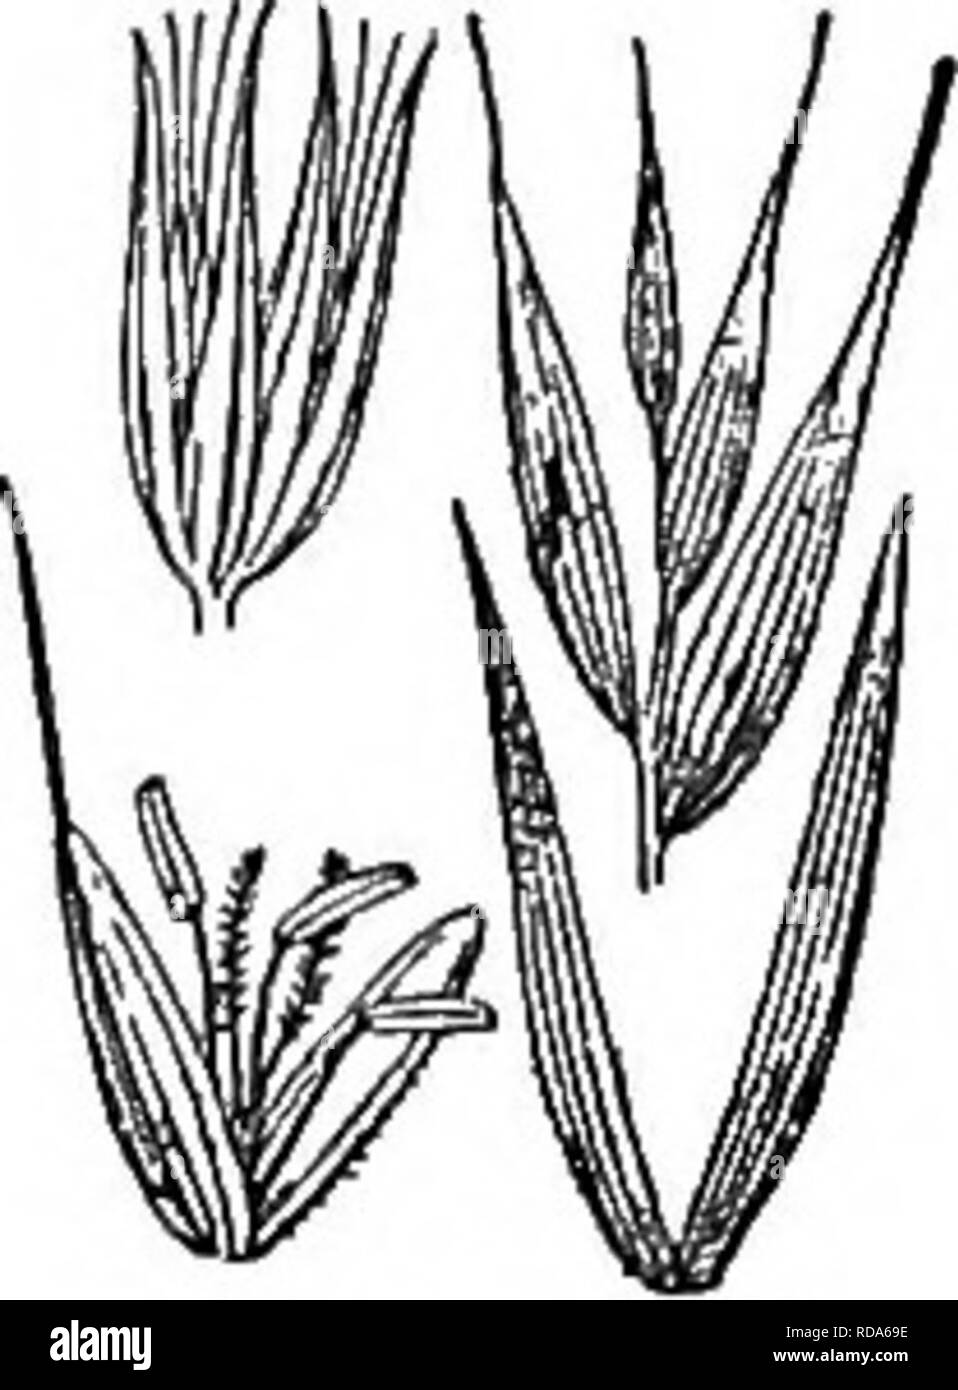 . Gray's new manual of botany. A handbook of the flowering plants and ferns of the central and northeastern United States and adjacent Canada. Botany. GRAMINEAB (GEASS FAMILY) 169. 198. E. virgrinicus. Two spikelets X 1, Spikelet with glumes detached x 2. Floret X 2. * Glumes as long as the lemmas or nearly so. *- Glumes and le.mmas rigid, all or only the latter awned. ++ Glumes bowed out, the base yellow and indurated for 1-2 mm, 1. E. virginicus L, Green or glaucous ; culms stout, 6-10 dm. high; sheaths smooth or hairy; blades 1.5-3 dm. long, 4-8 mm. wide, scabrous ; spike 4-14 cm. long, 12  Stock Photo